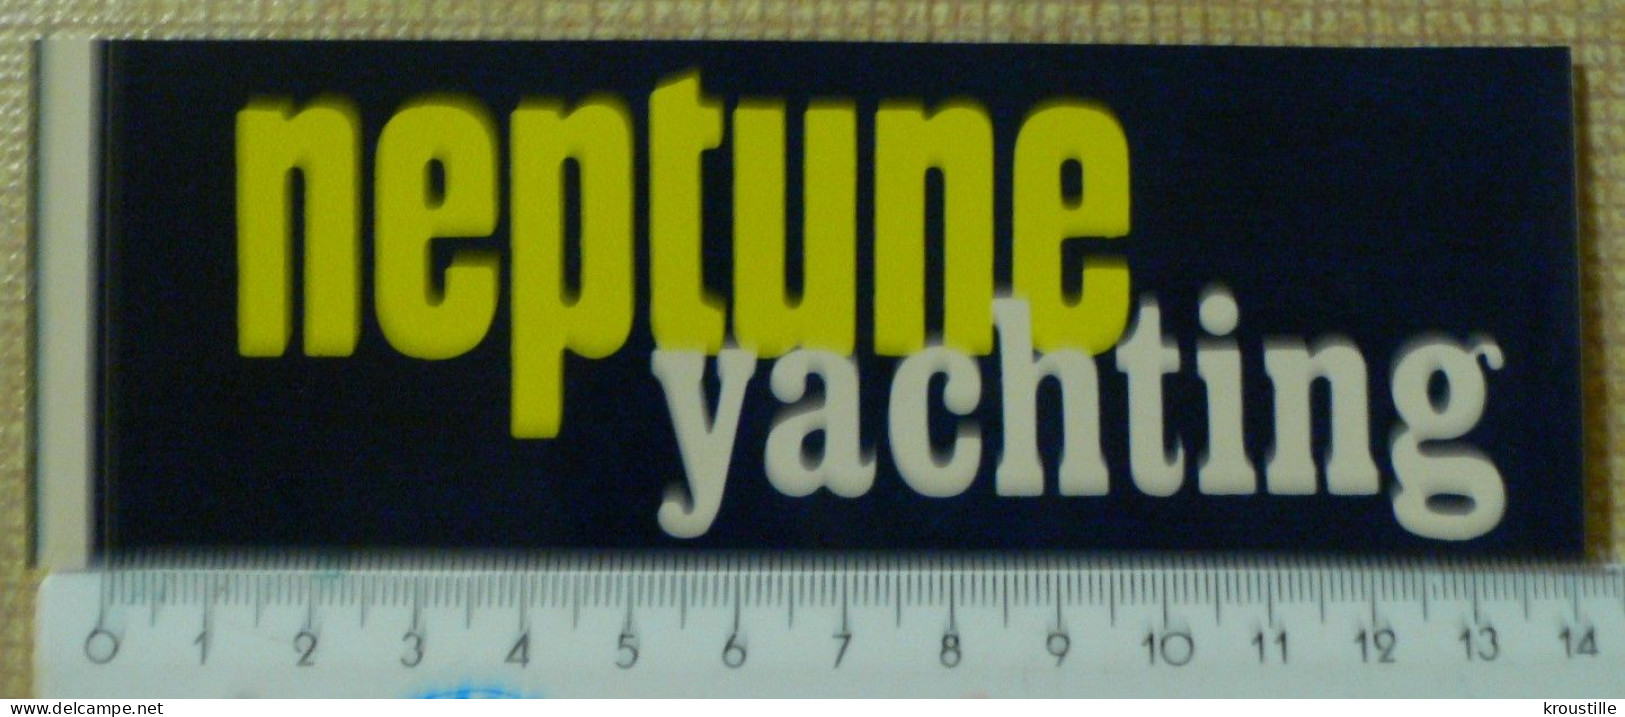 AUTOCOLLANT NEPTUNE YACHTING - Stickers